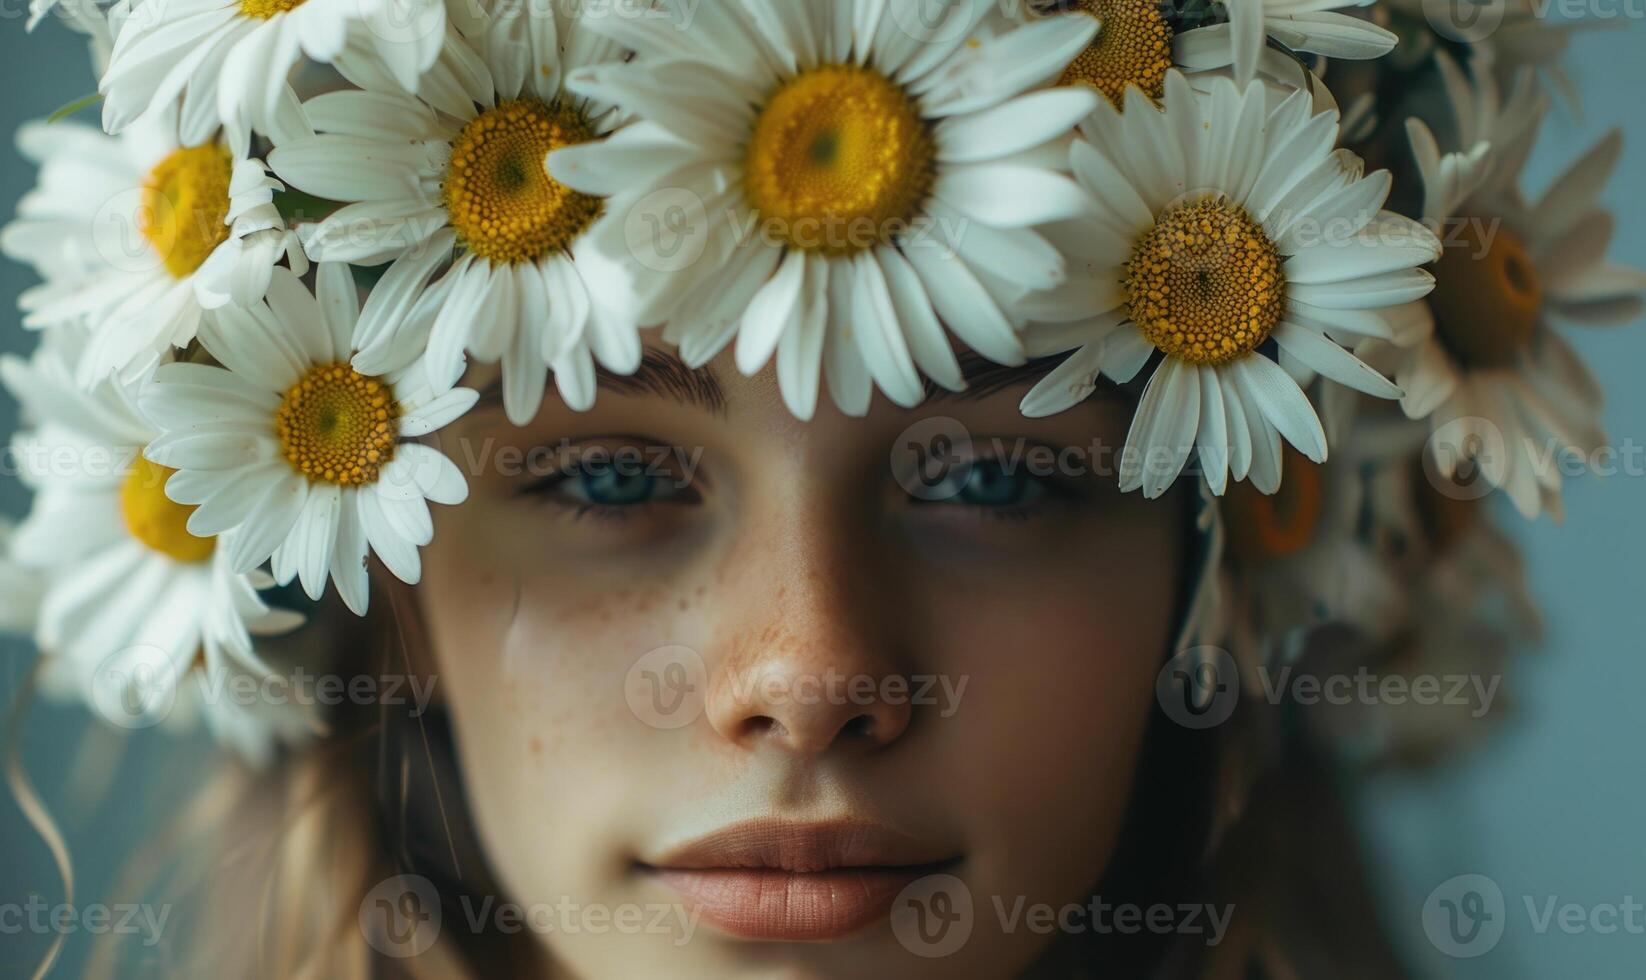 Daisies arranged in a floral crown, young woman in floral crown, nature beauty photo